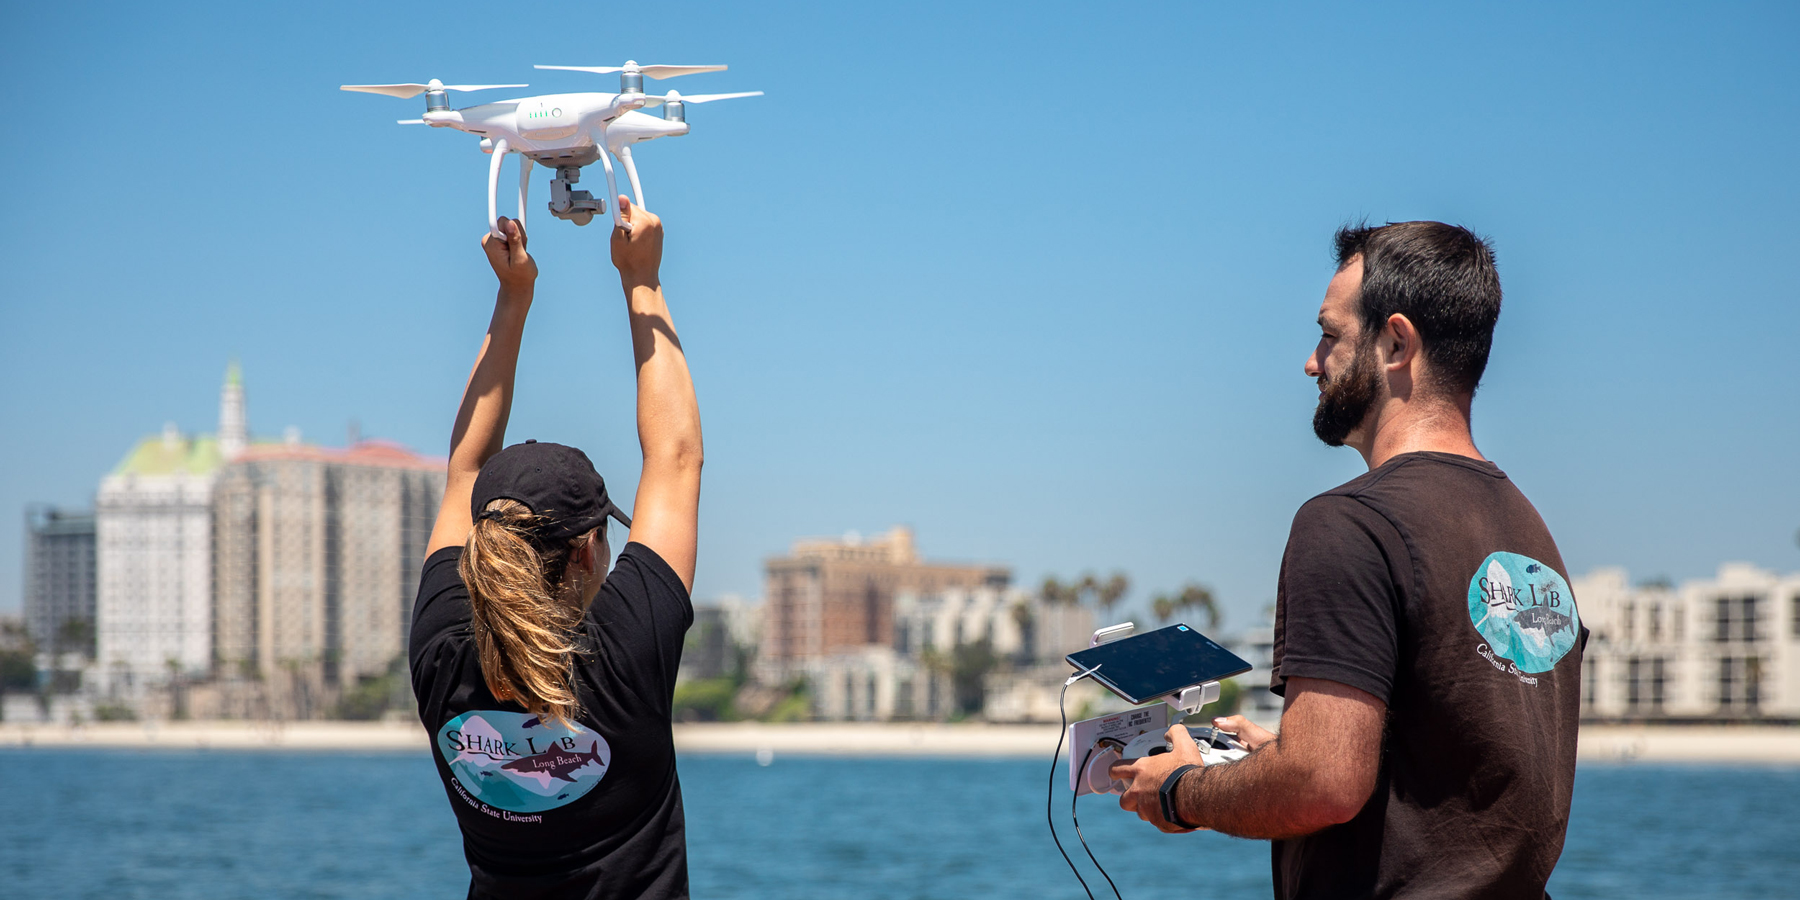 Researchers in the CSULB Shark Lab fly a drone to conduct a coastal survey for sharks.